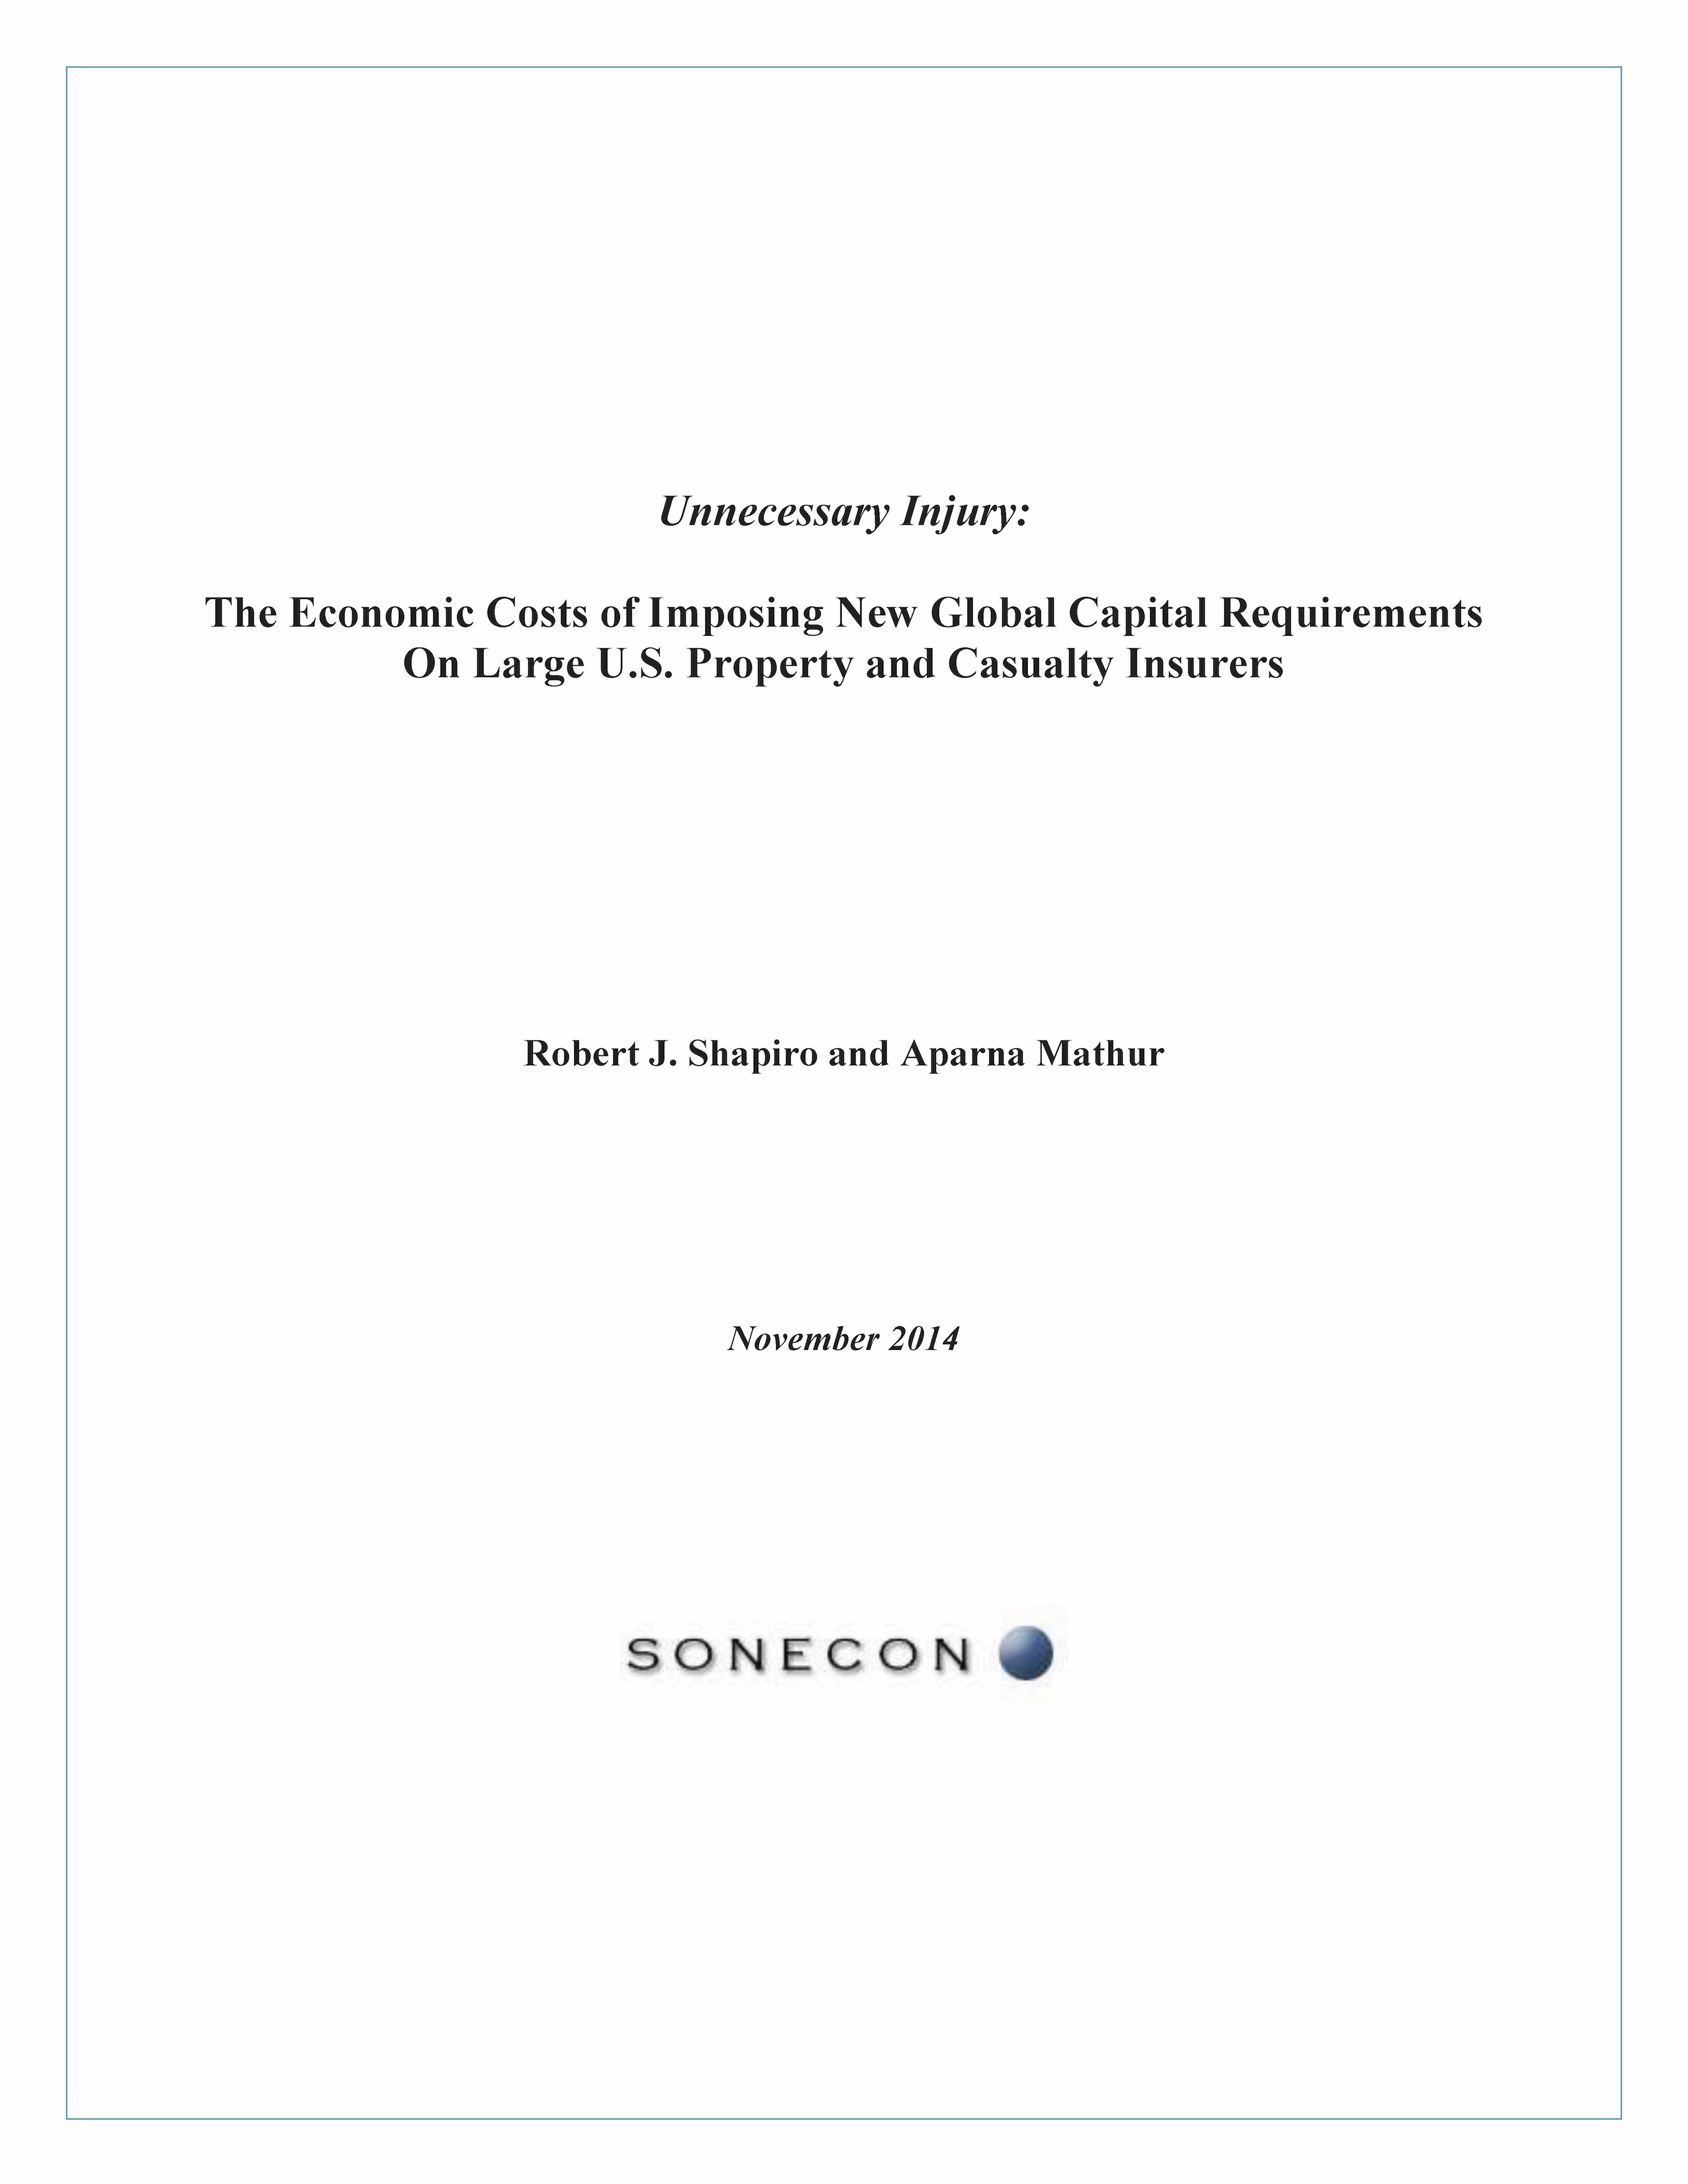 Unnecessary Injury: The Economic Costs of Imposing New Global Capital Requirements On Large U.S. Property and Casualty Insurers PDF